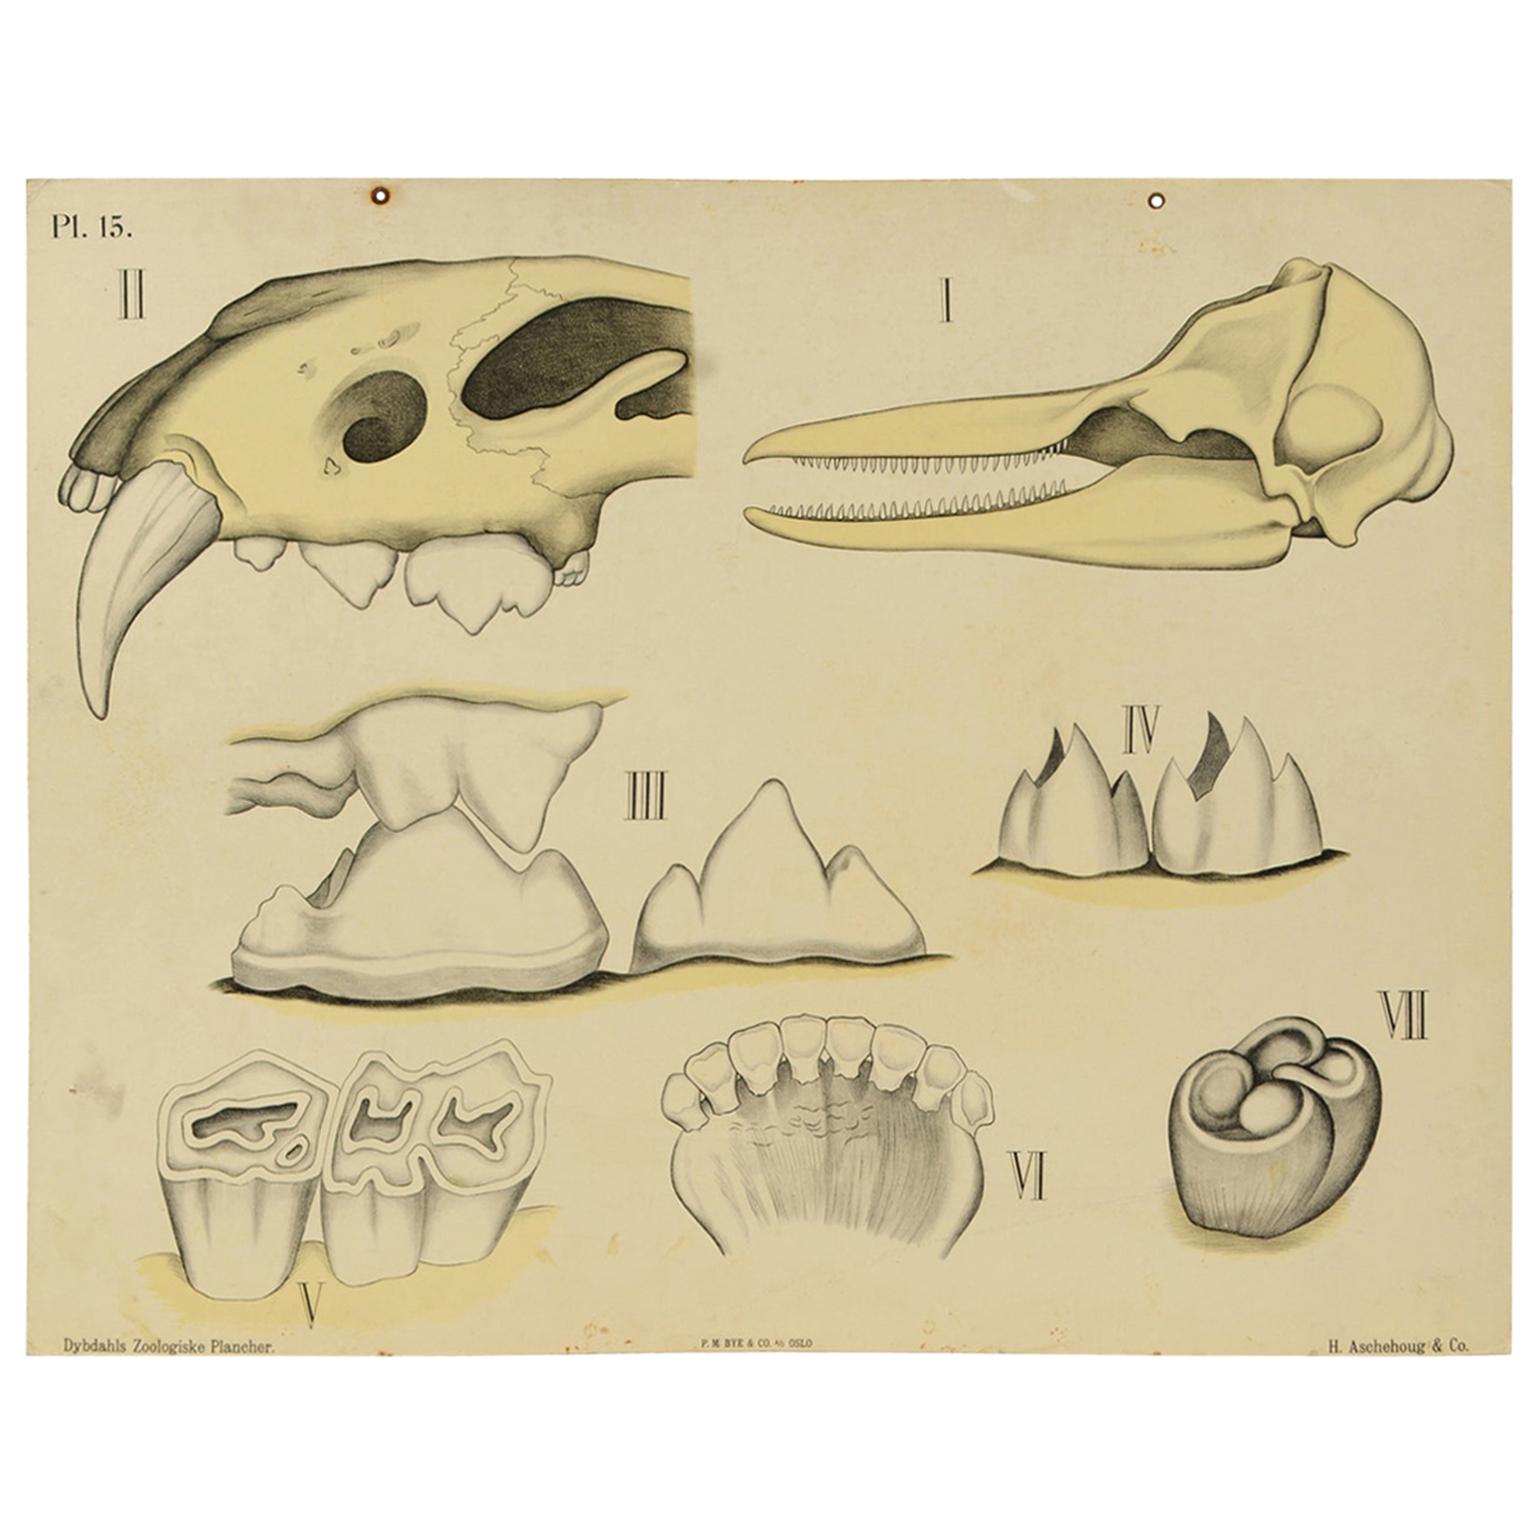 Zoological Lithograph Teeth of some Animals 1912 by H Aschehoug & Co, Norway